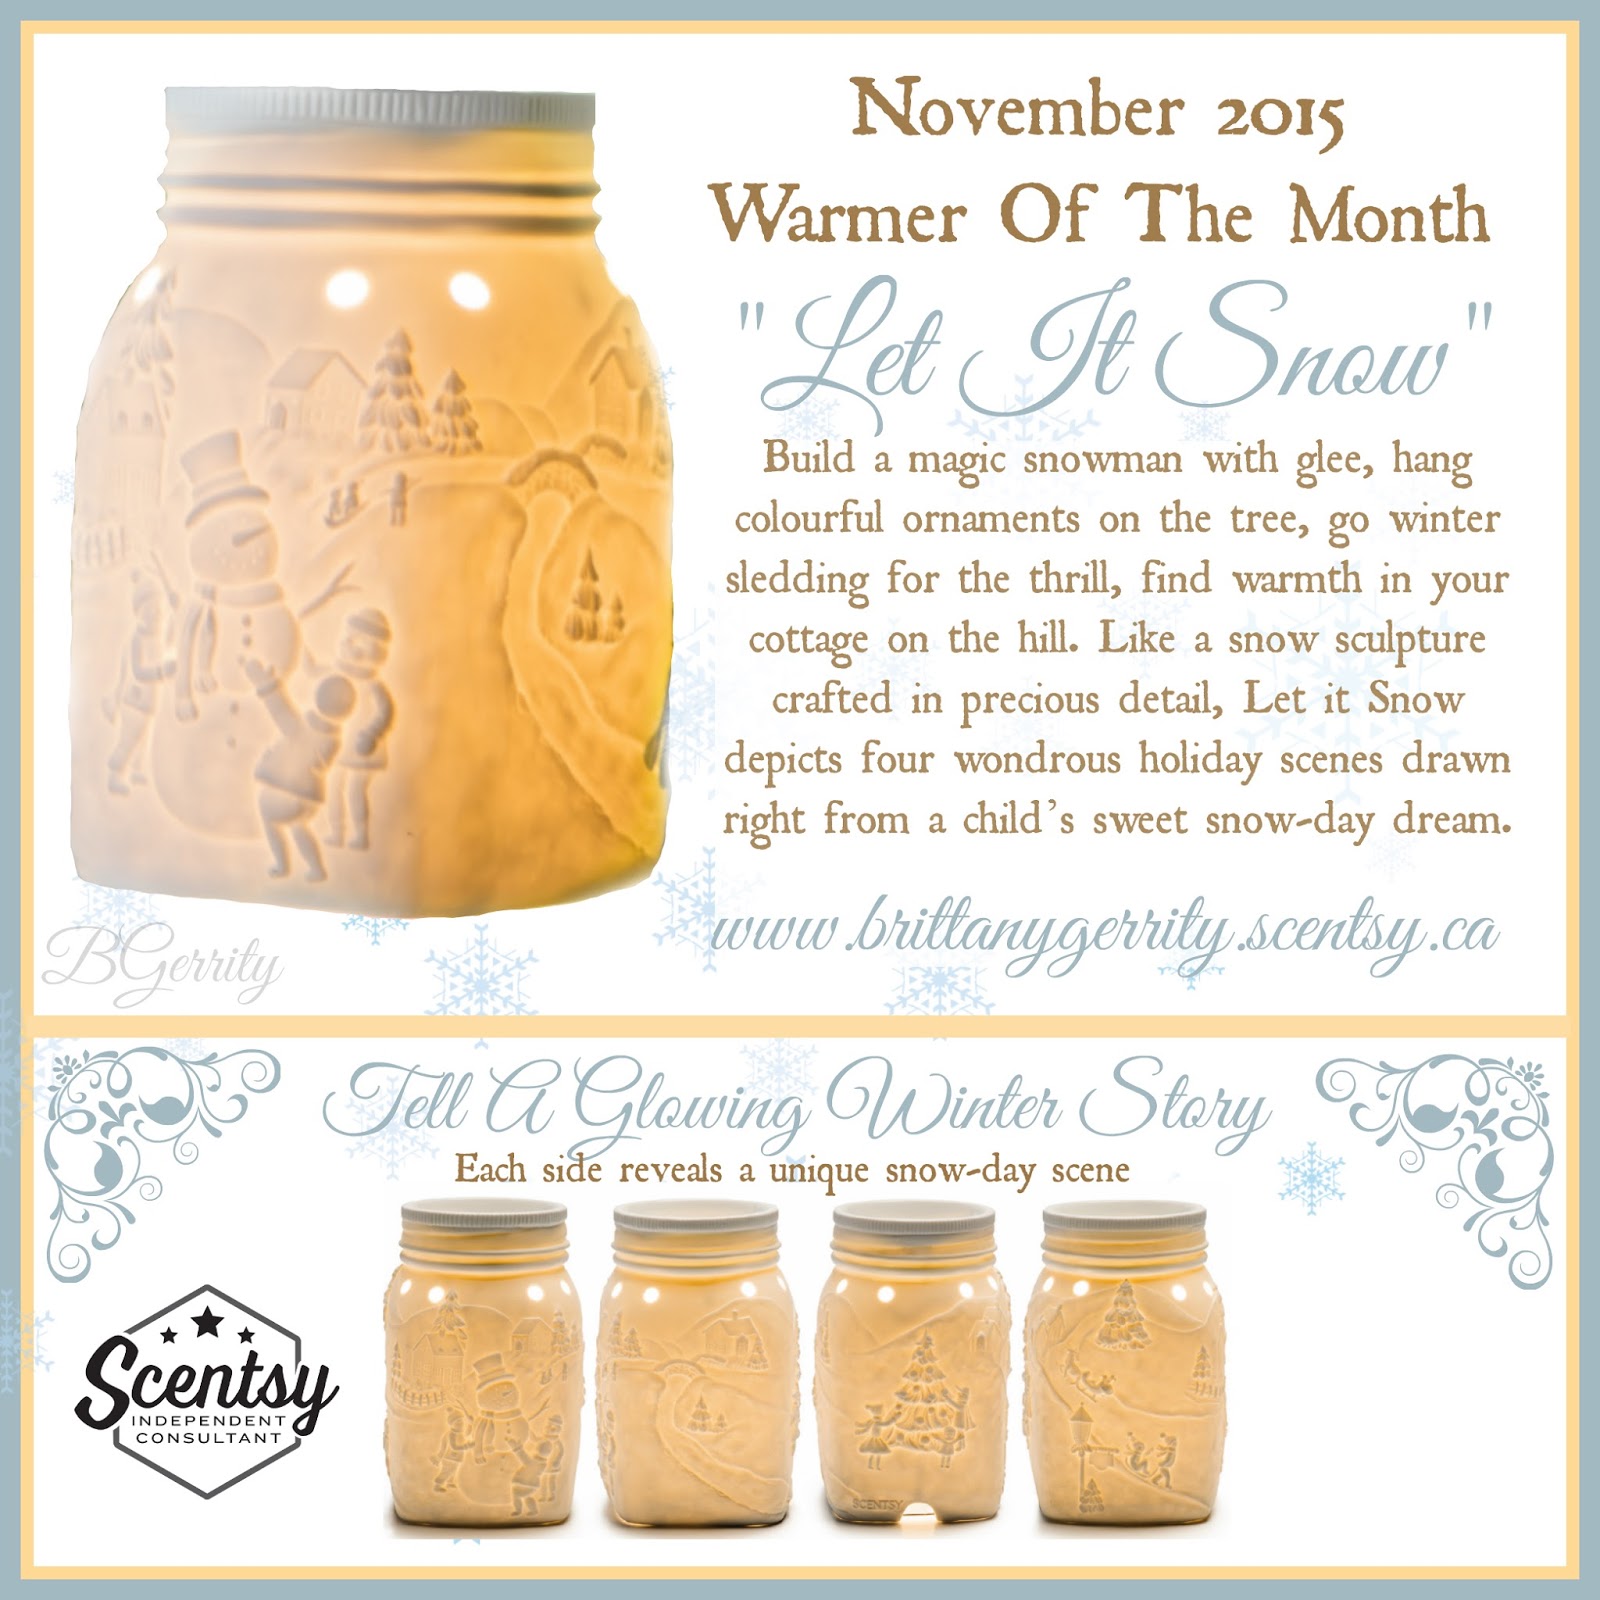 Talkin Scents 101 NOVEMBER Warmer & Scent Of The Month